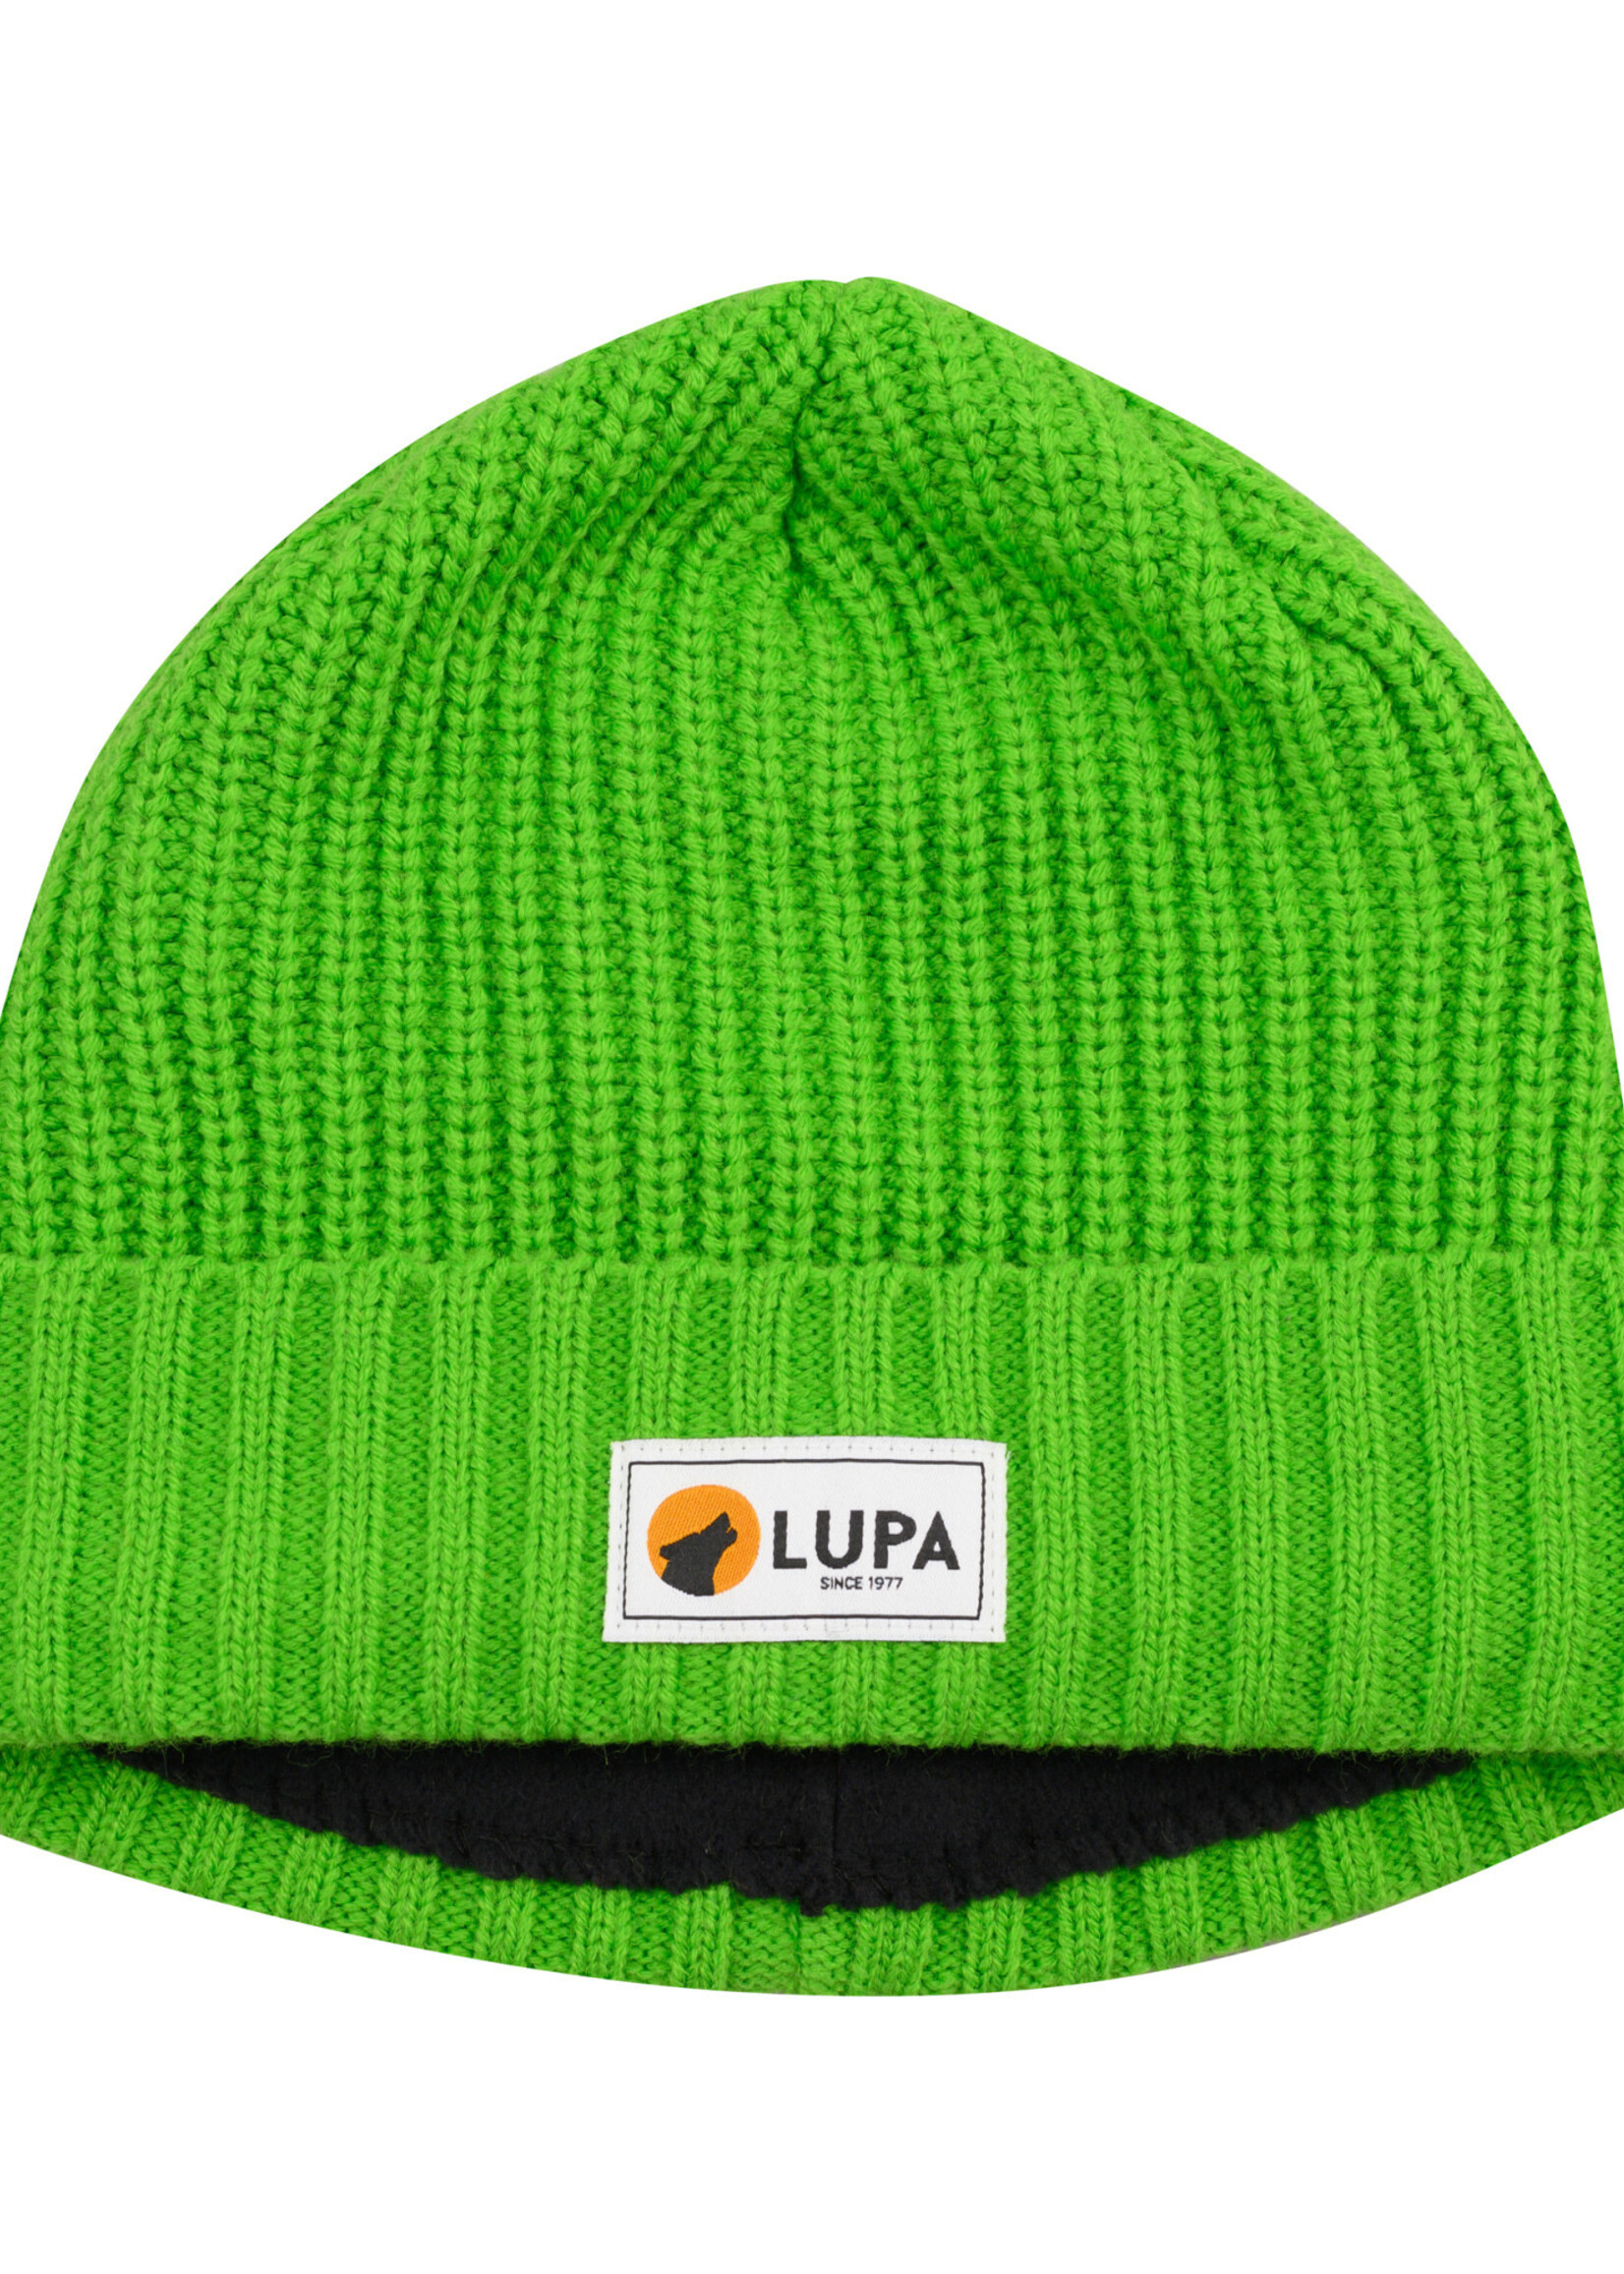 Lupa Tuque Enfant Froid Extreme Lime | Canadian-made Kids Extreme Cold Beanie Lime